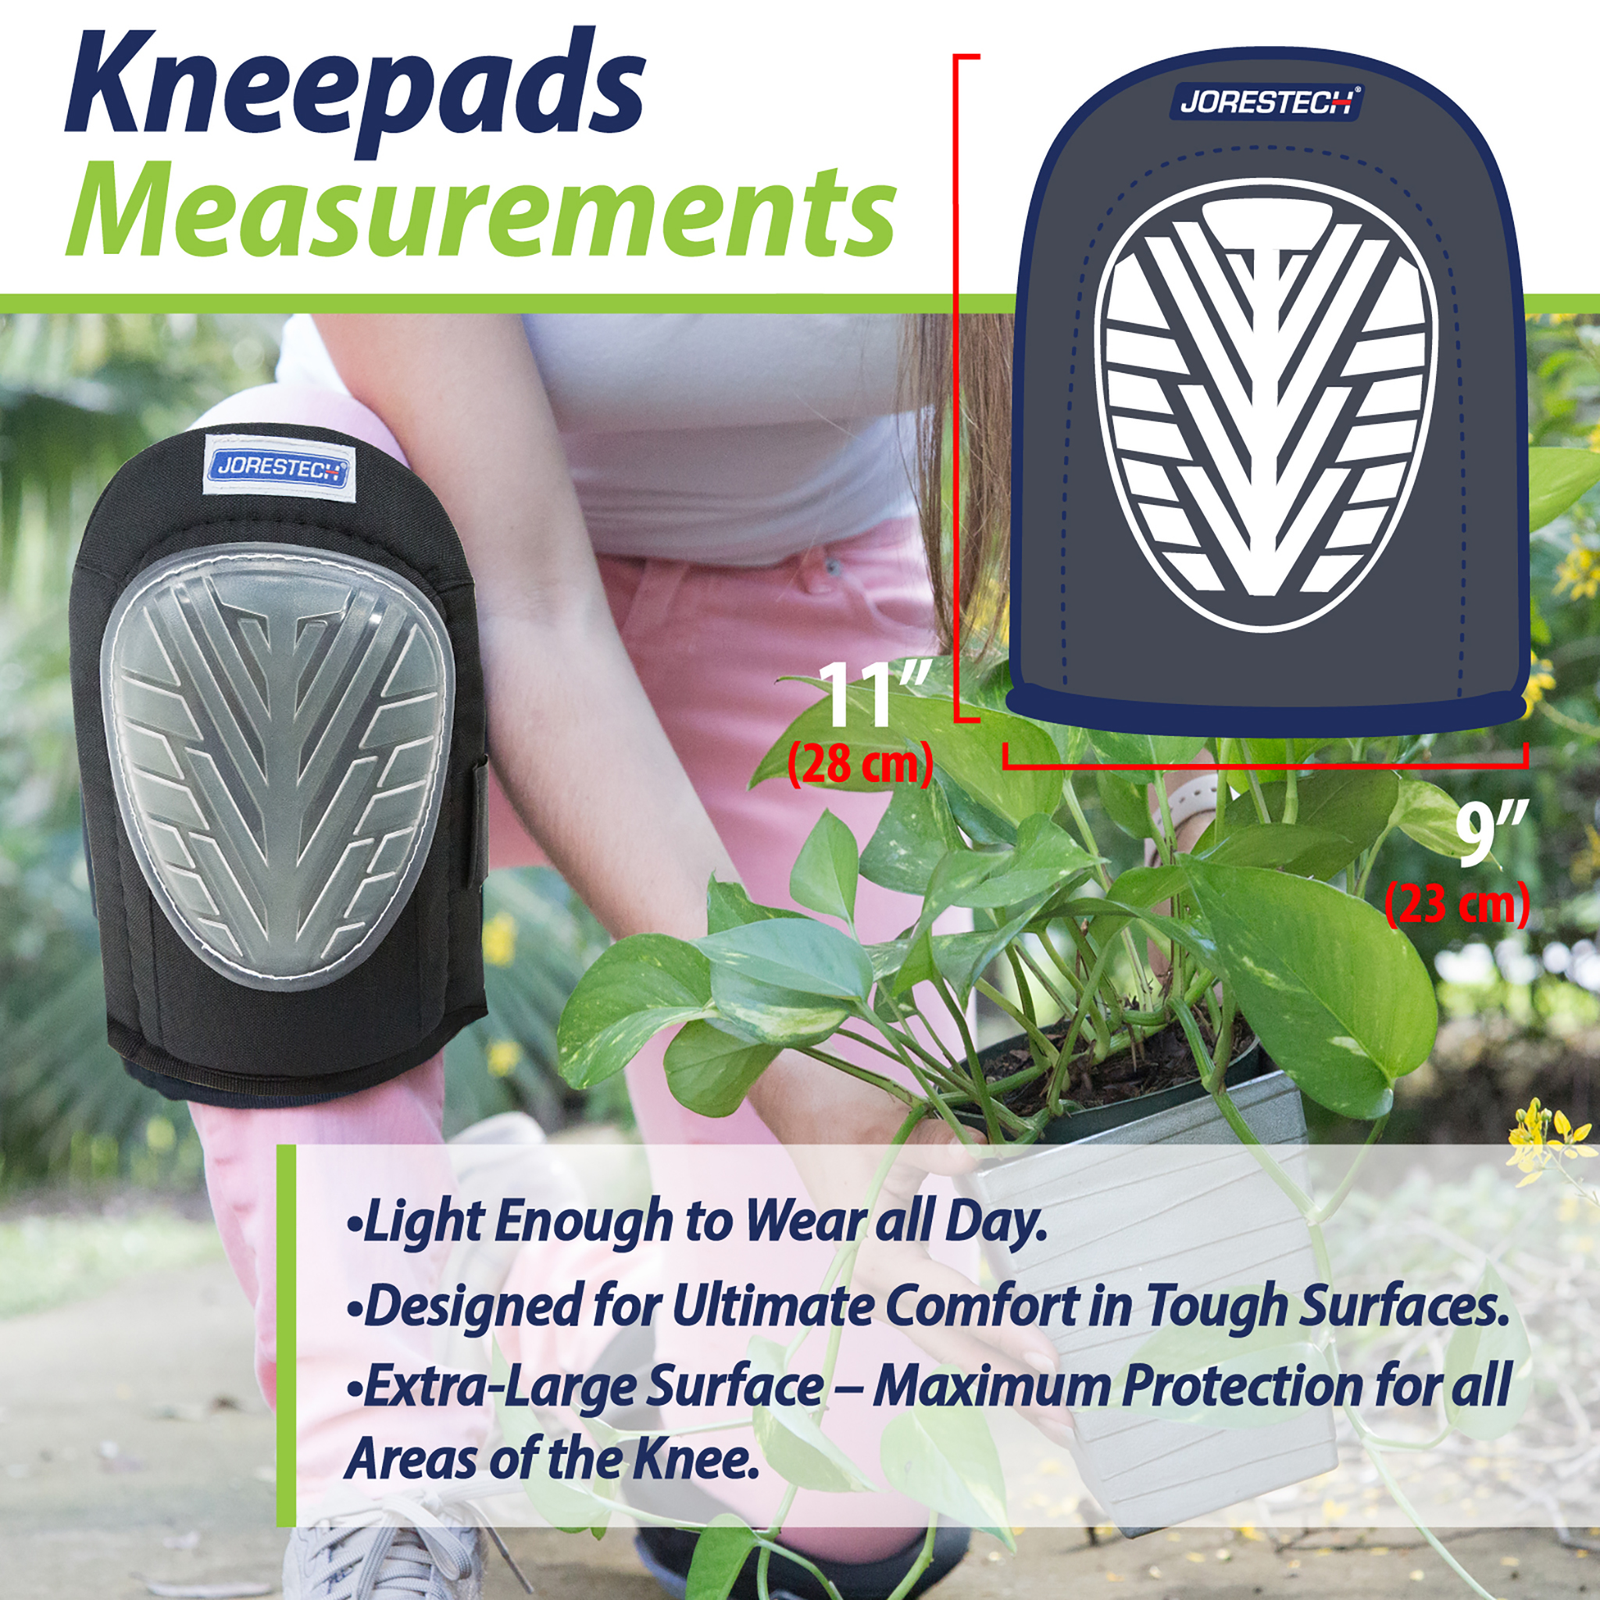 Lady wearing JORESTECH ® knee pads kneeling while doing gardening. Infographic with measurements: 11